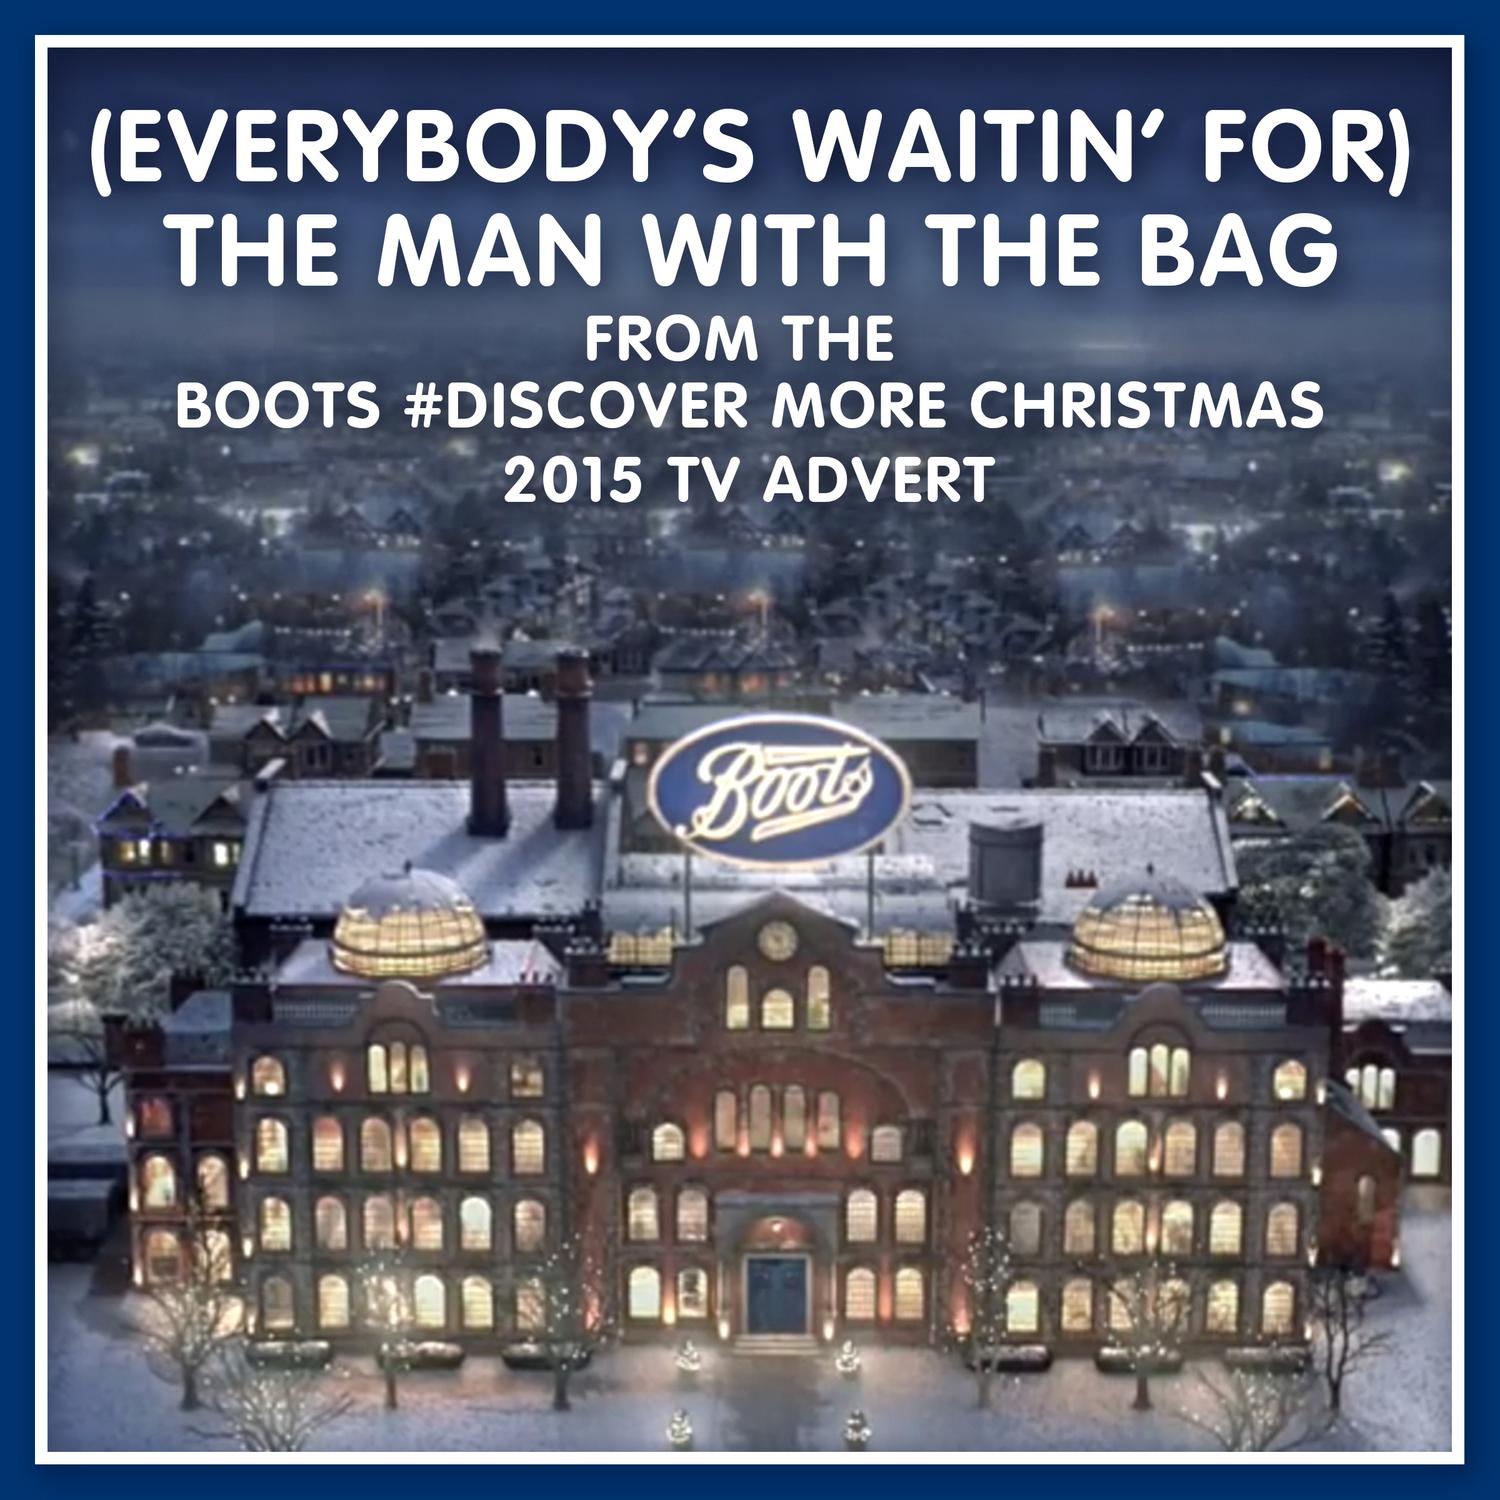 Everybody's Waitin' For) The Man with the Bag (From the Boots "Discover More" Christmas 2015 T.V. Advert)